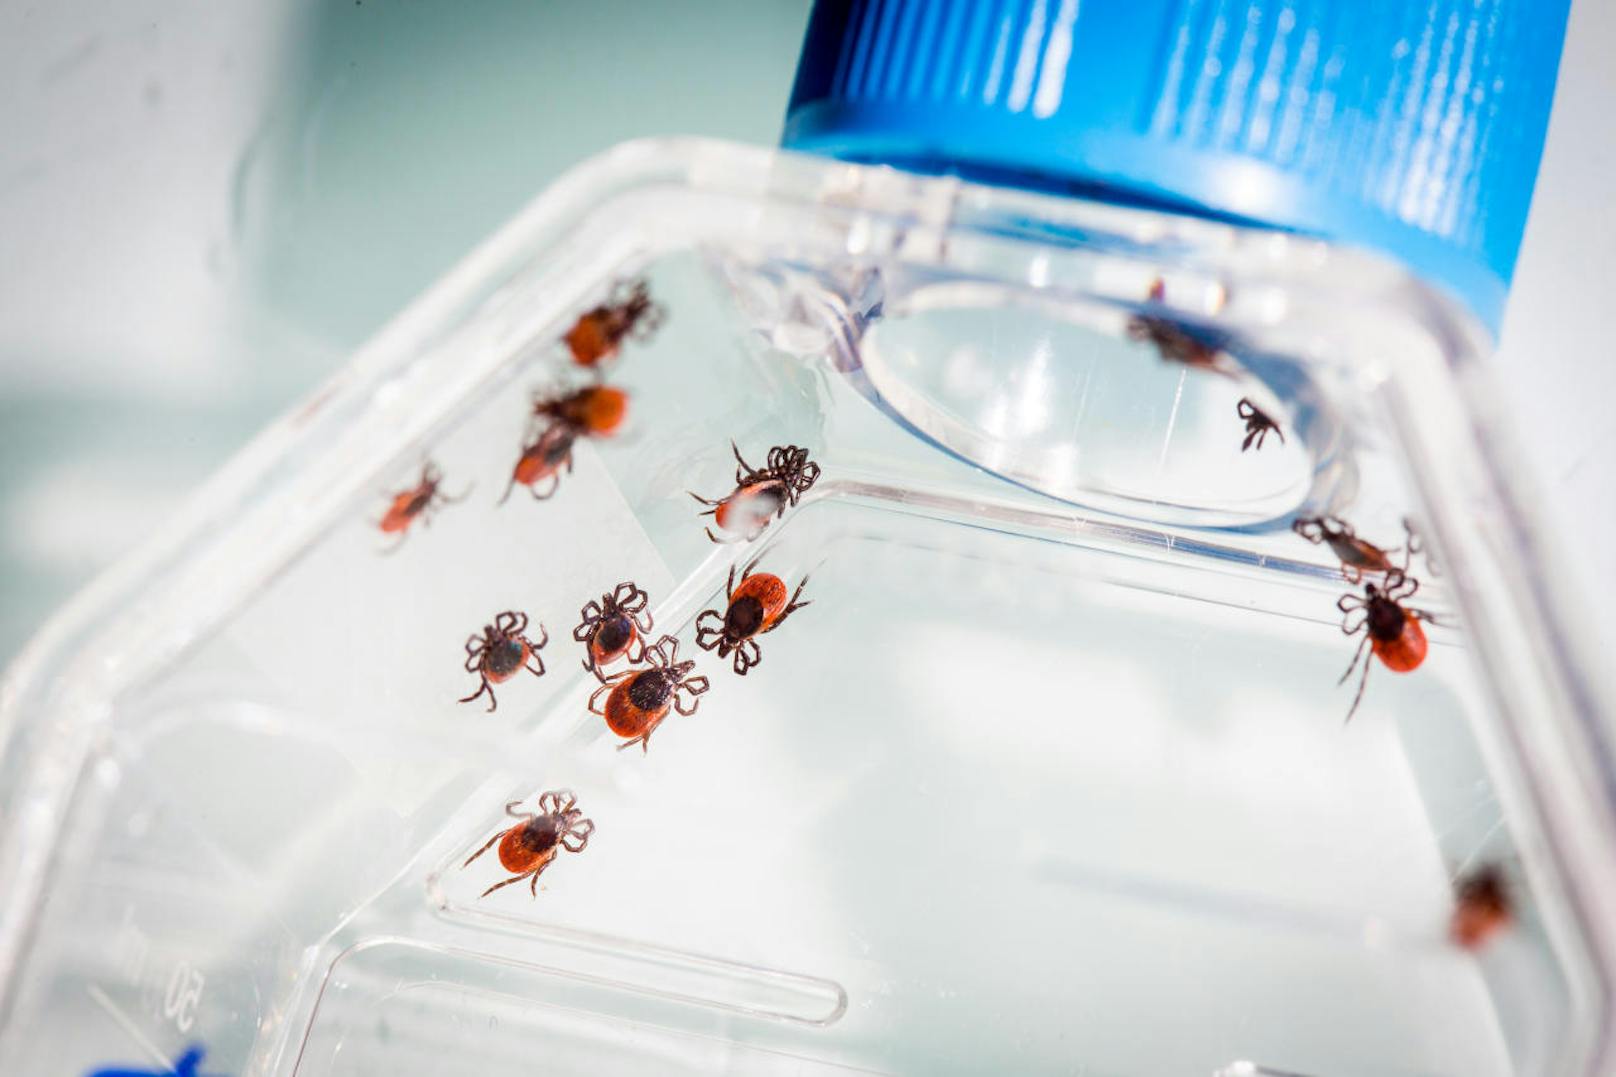 Download von www.picturedesk.com am 19.06.2018 (12:08). 
Study and analysis of female ticks Ixodes Ricinus by the animal health laboratory of Anses (National Agency of National Sanitary Food Security) of Maisons-Alfort, France. - 20170406_PD16068